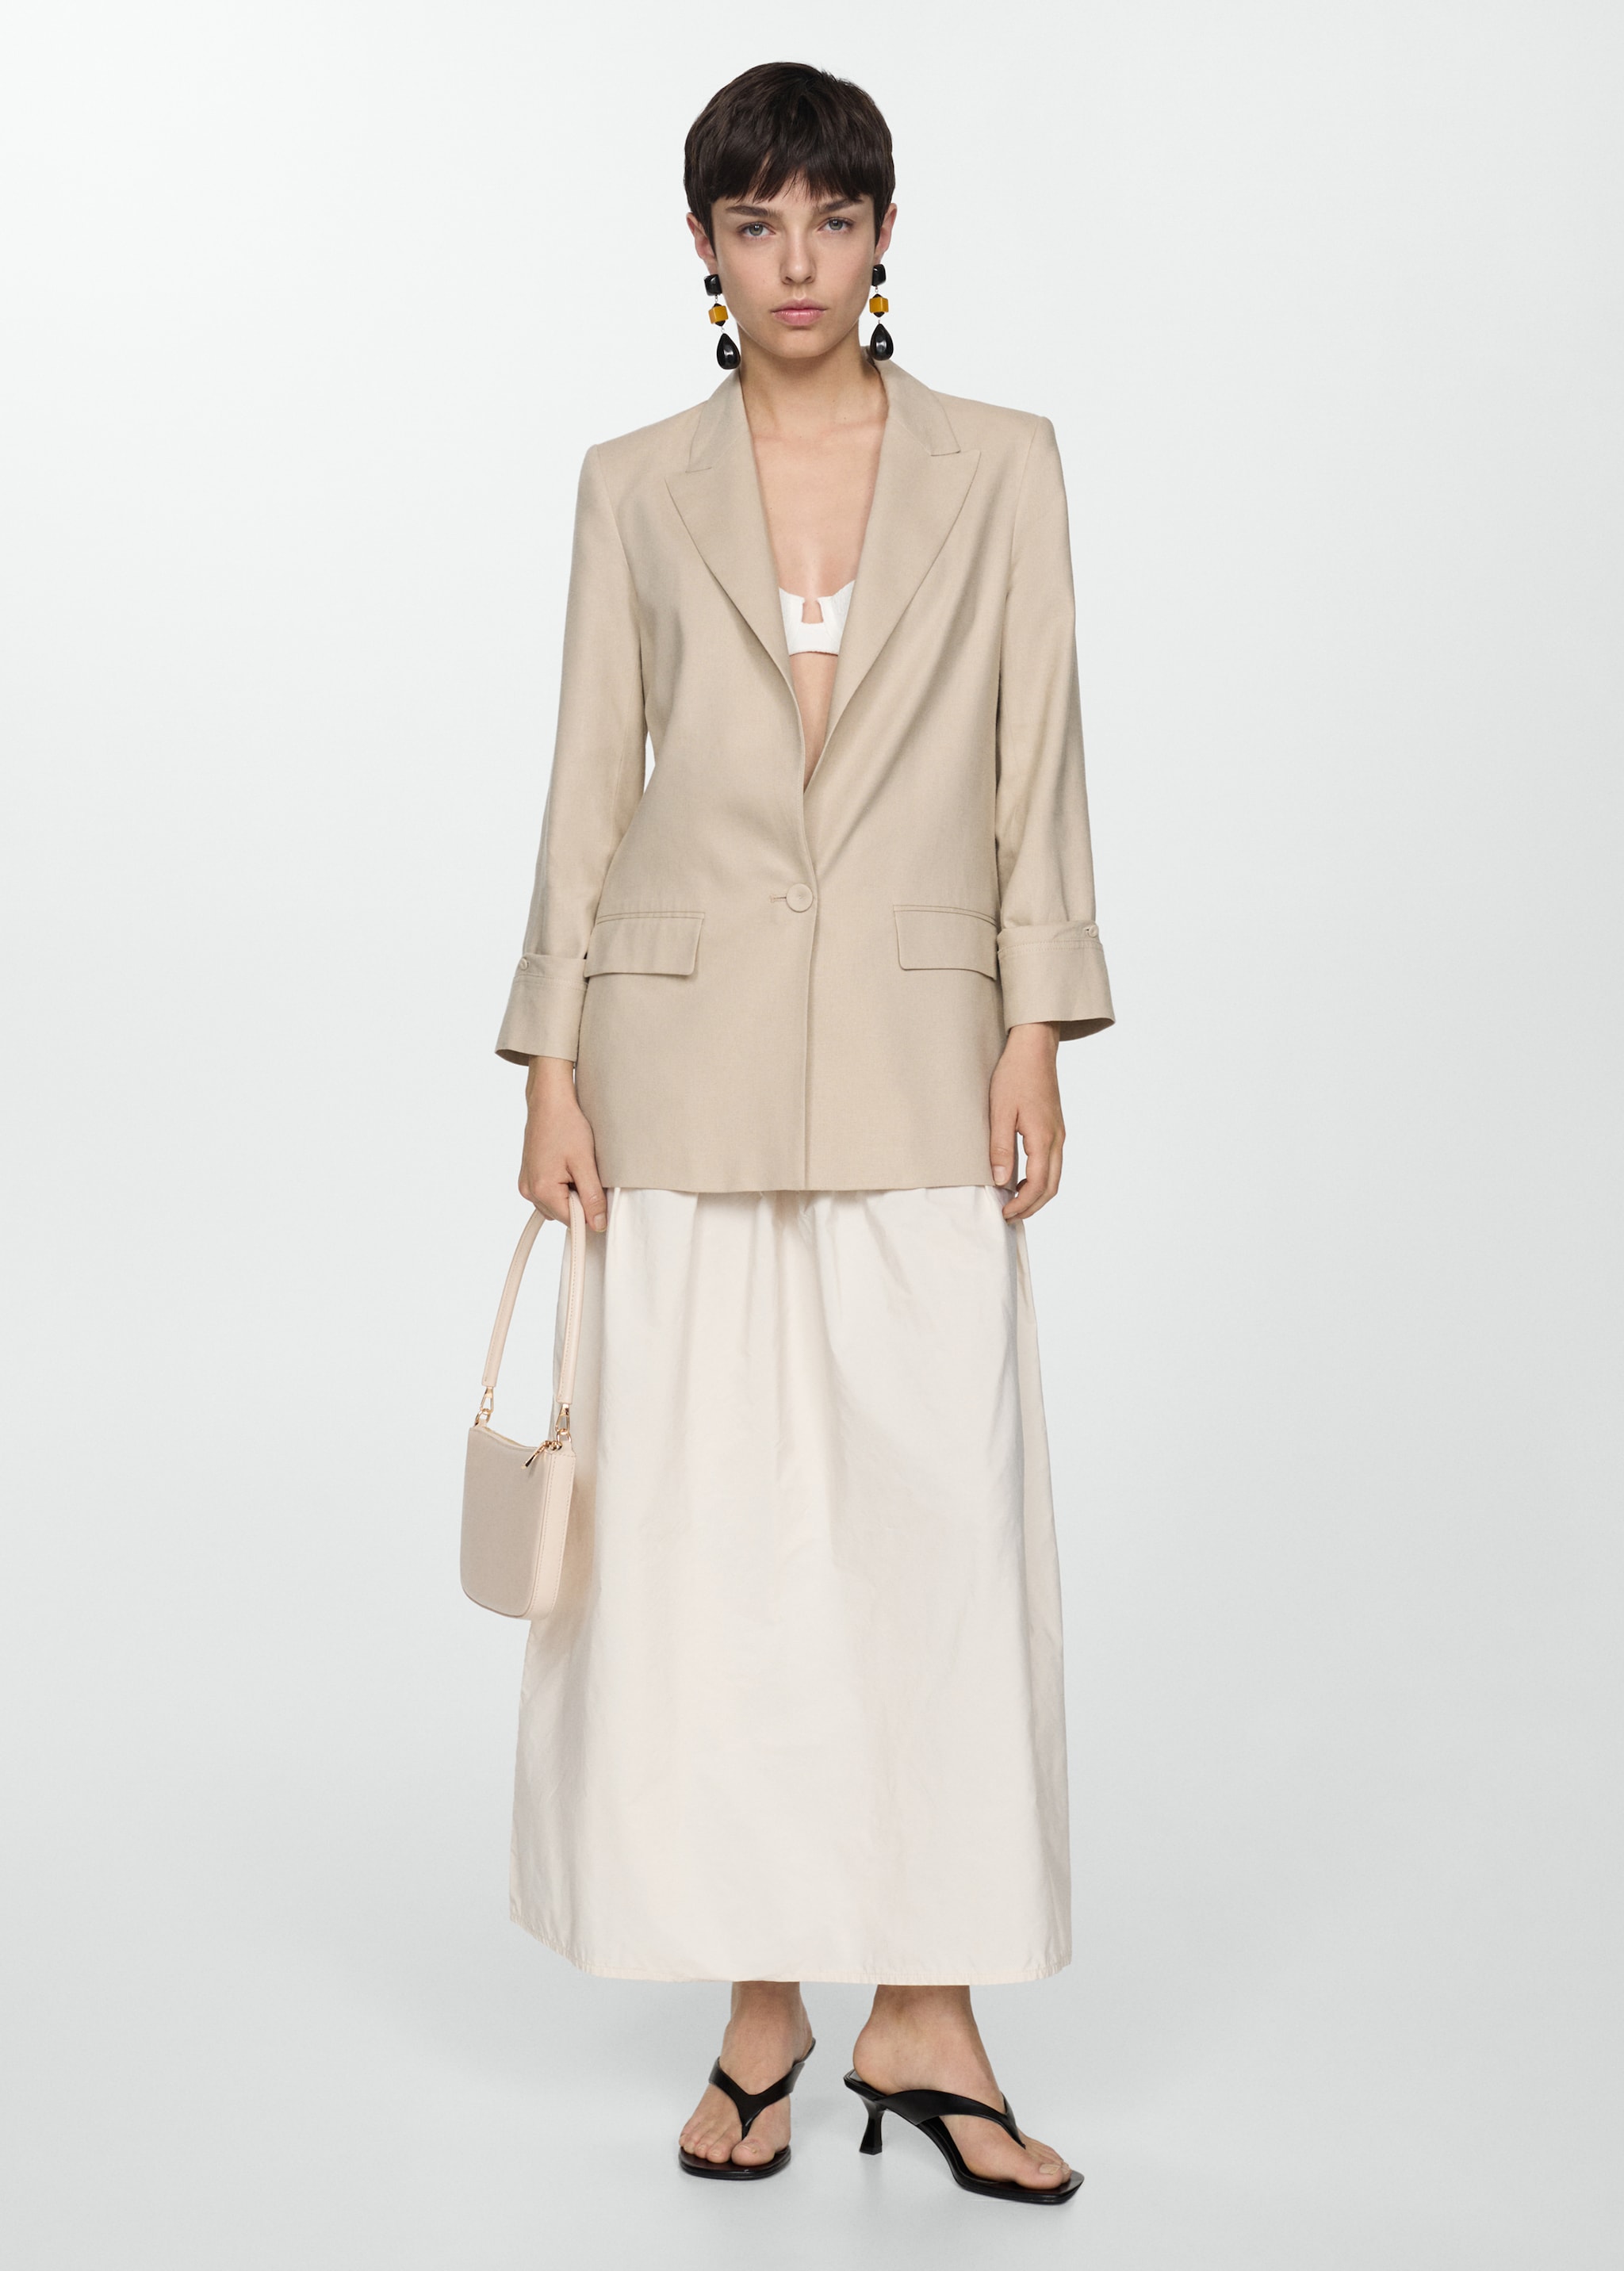 Linen jacket with buttoned cuffs - General plane